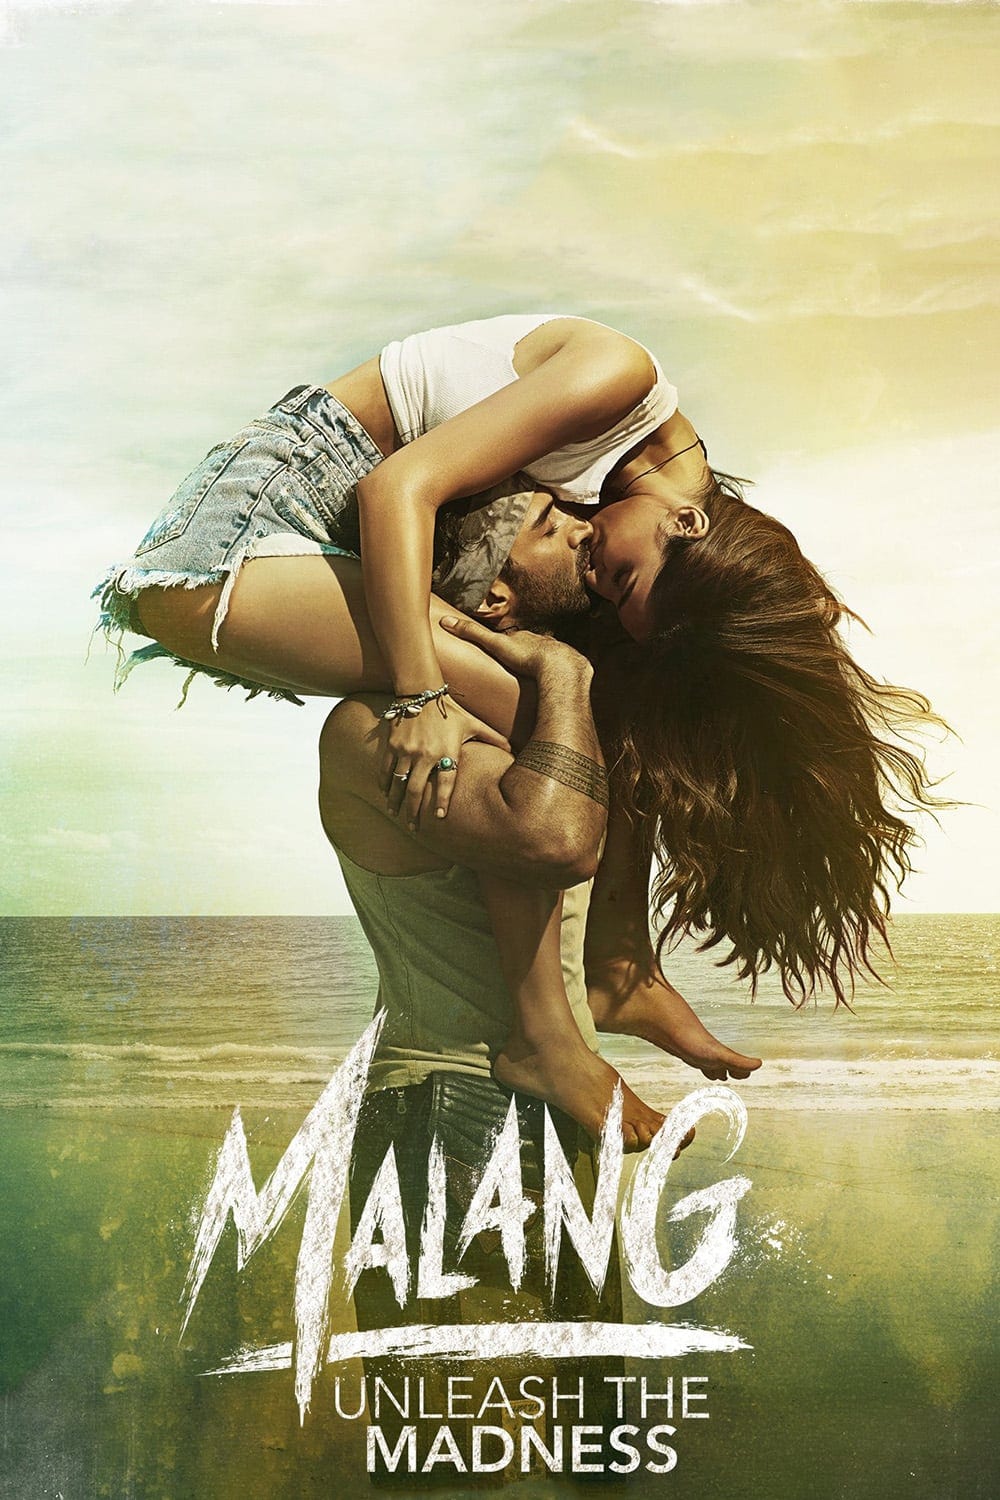 Poster for the movie "Malang"